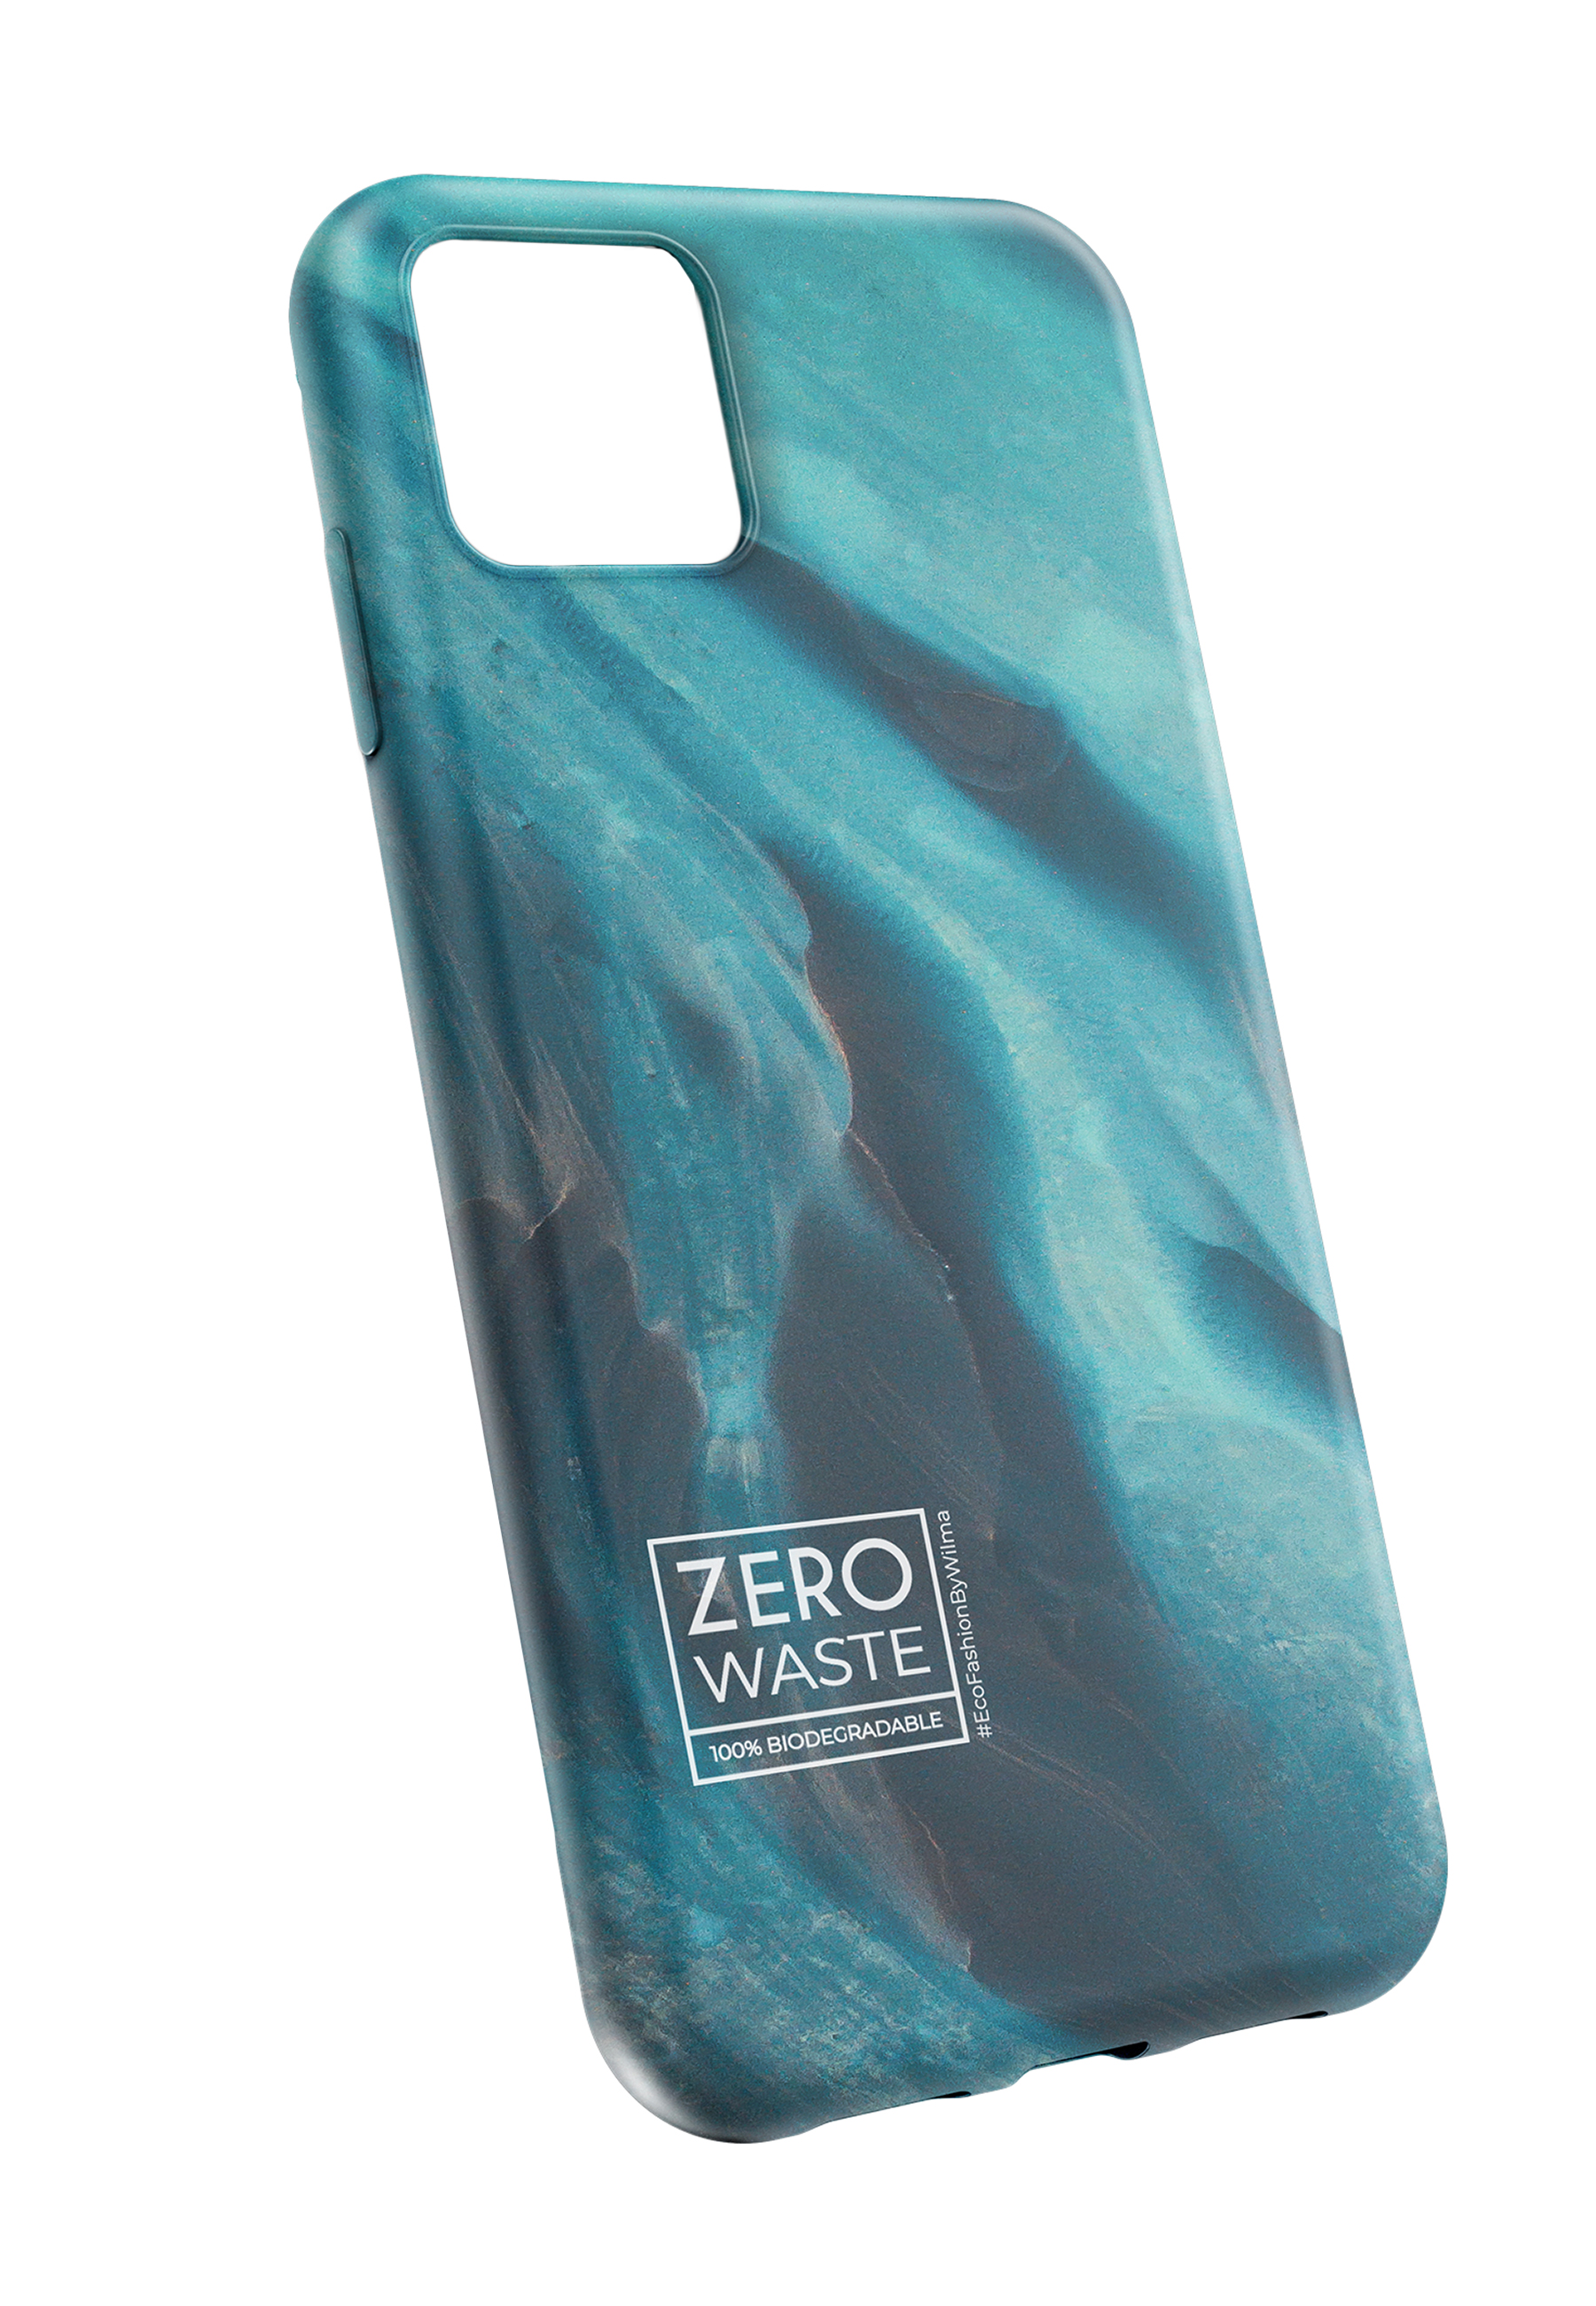 FASHION WILMA Apple, ECO Backcover, iPhone _IP11, 11, blue BY